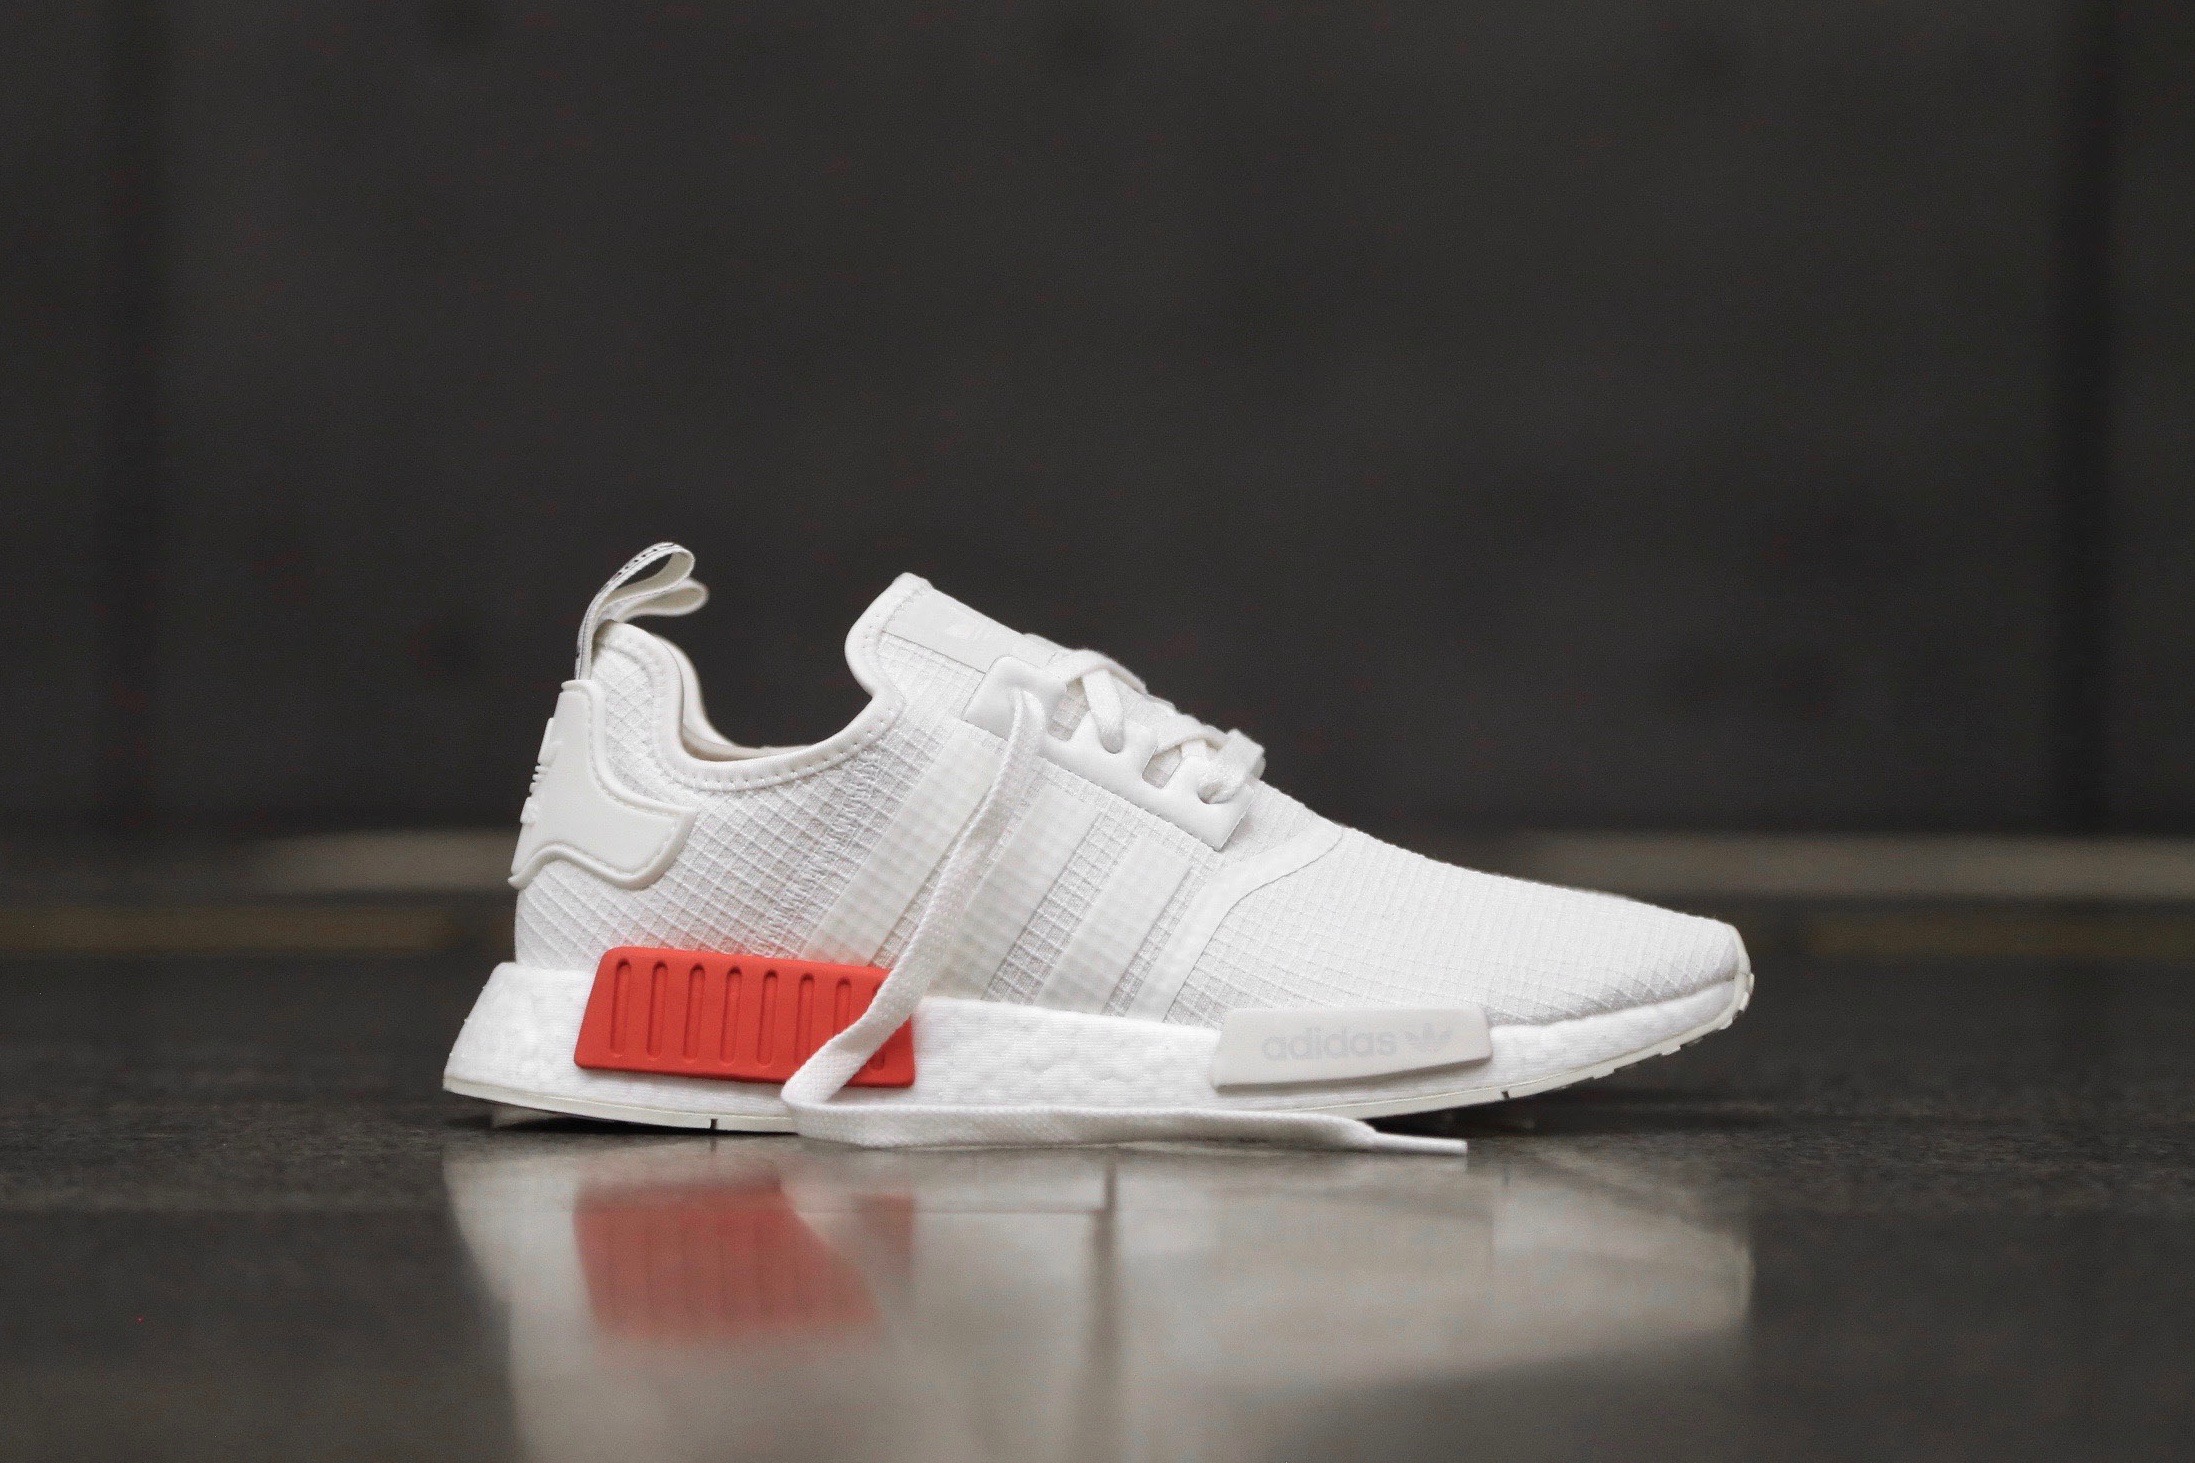 adidas nmd off white lush red- OFF 57 